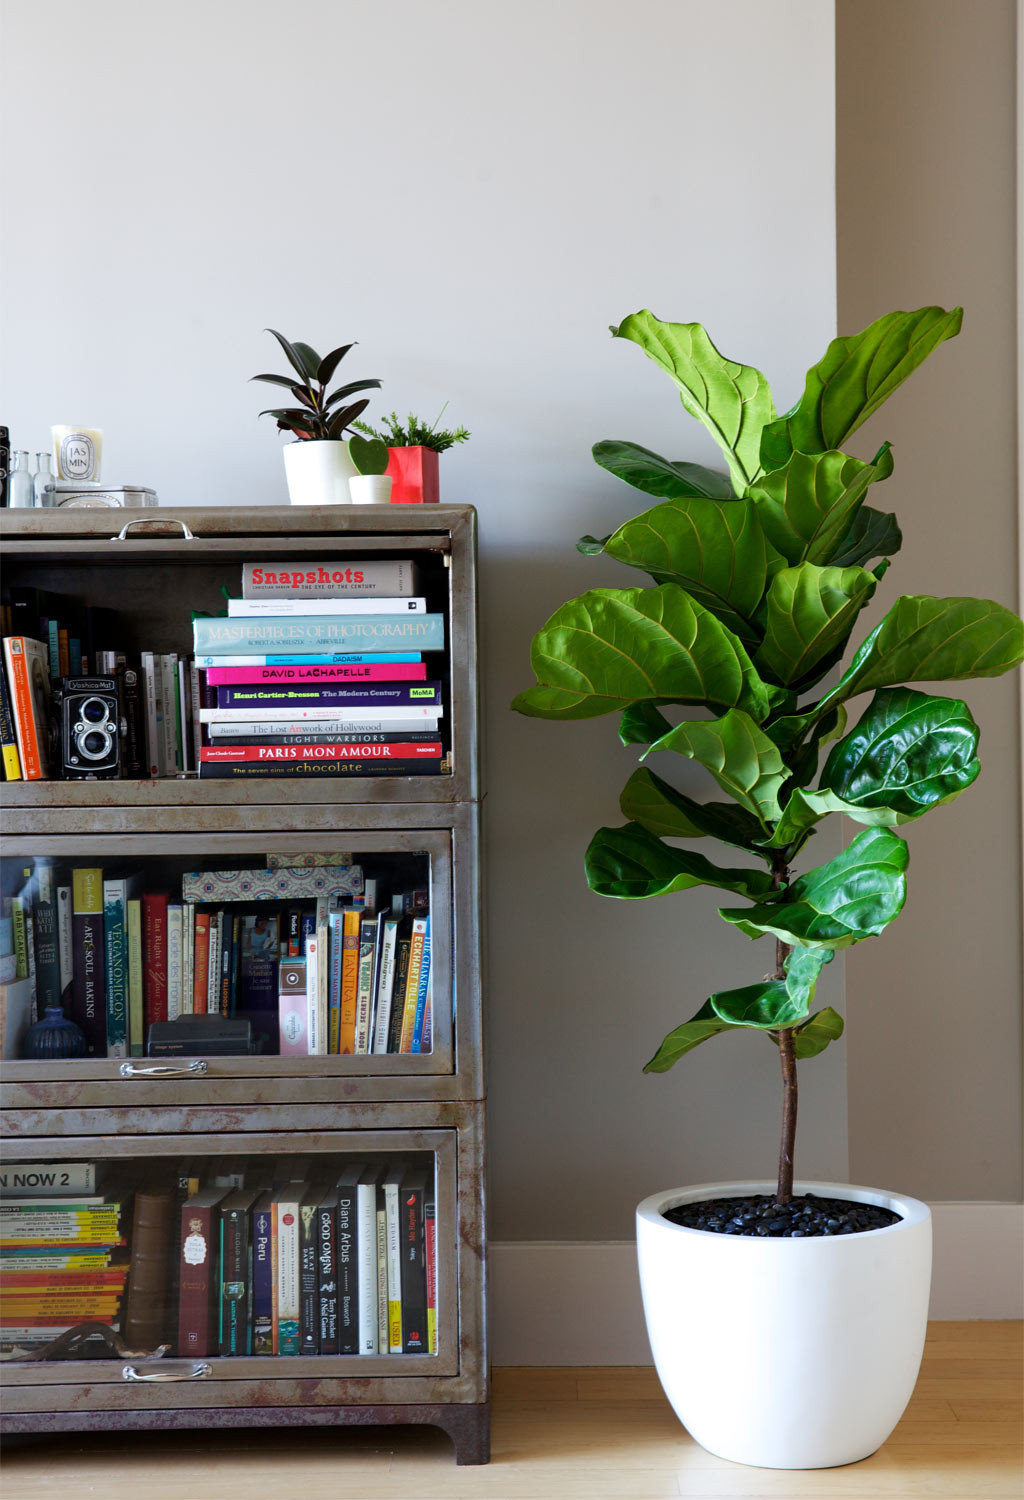 Best Indoor Trees for Low Light Adding Greenery to Your Home